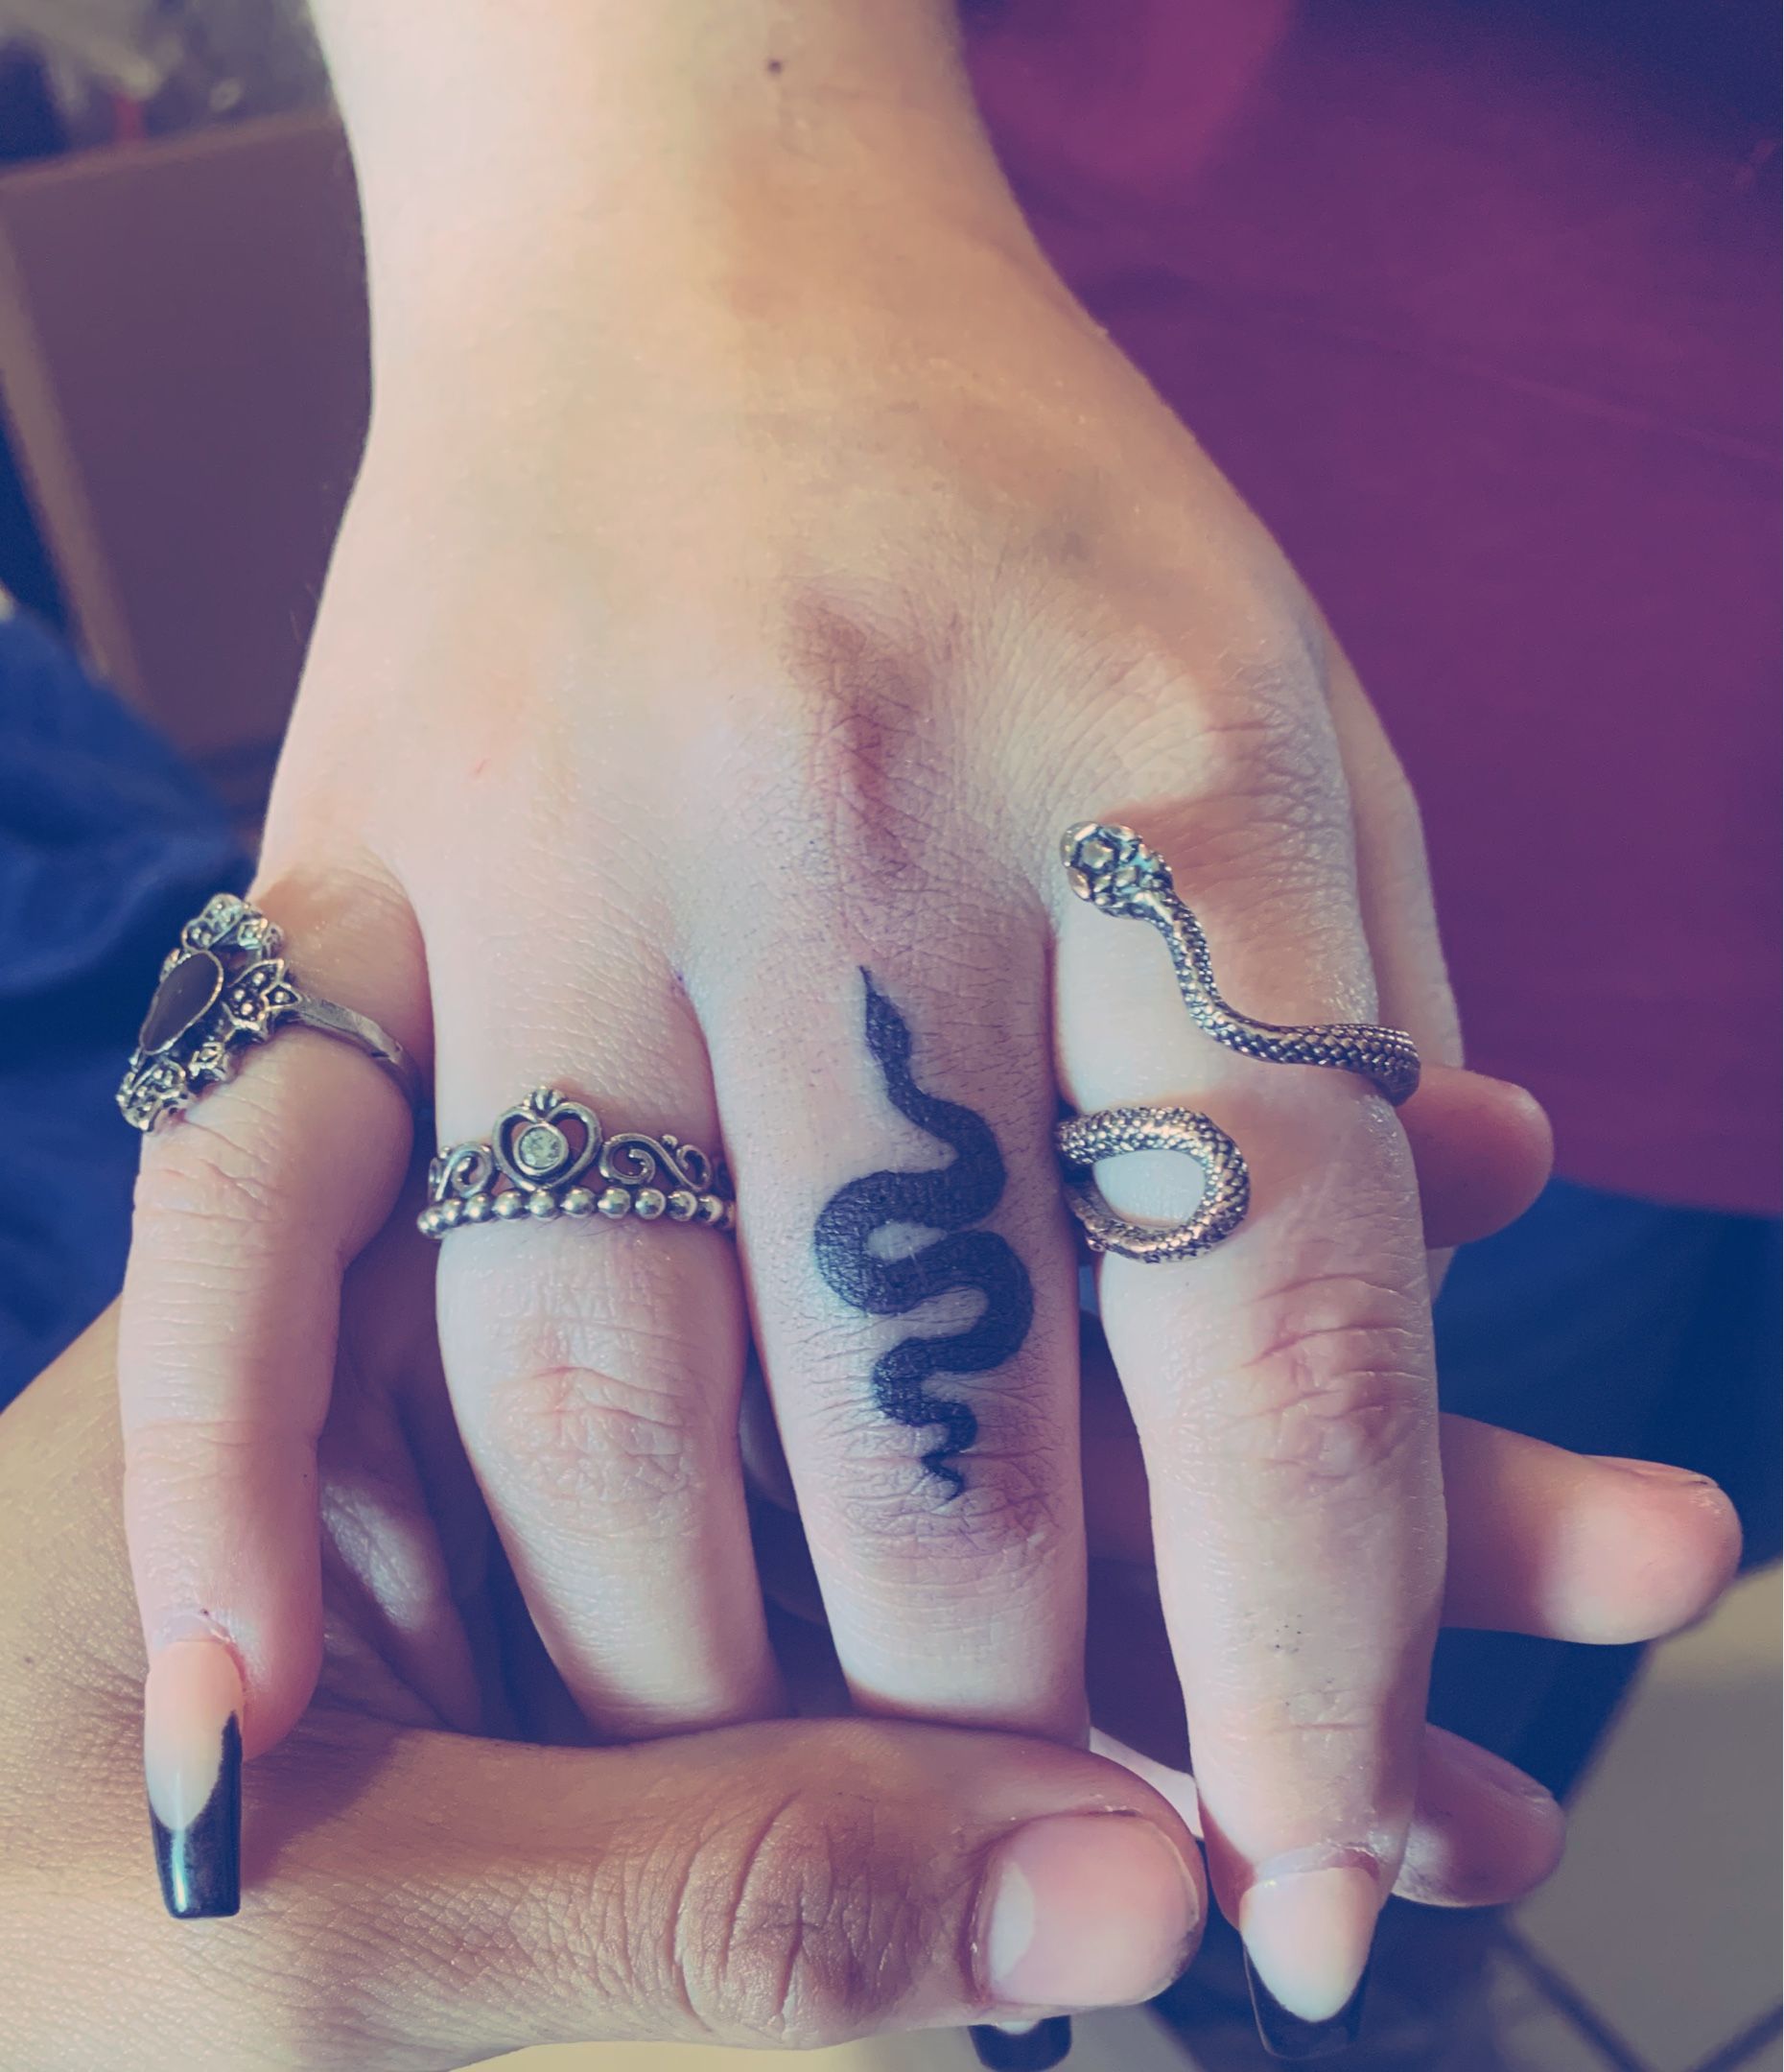 Tattoo Ideas for the Hands, Fingers, and Palms - TatRing